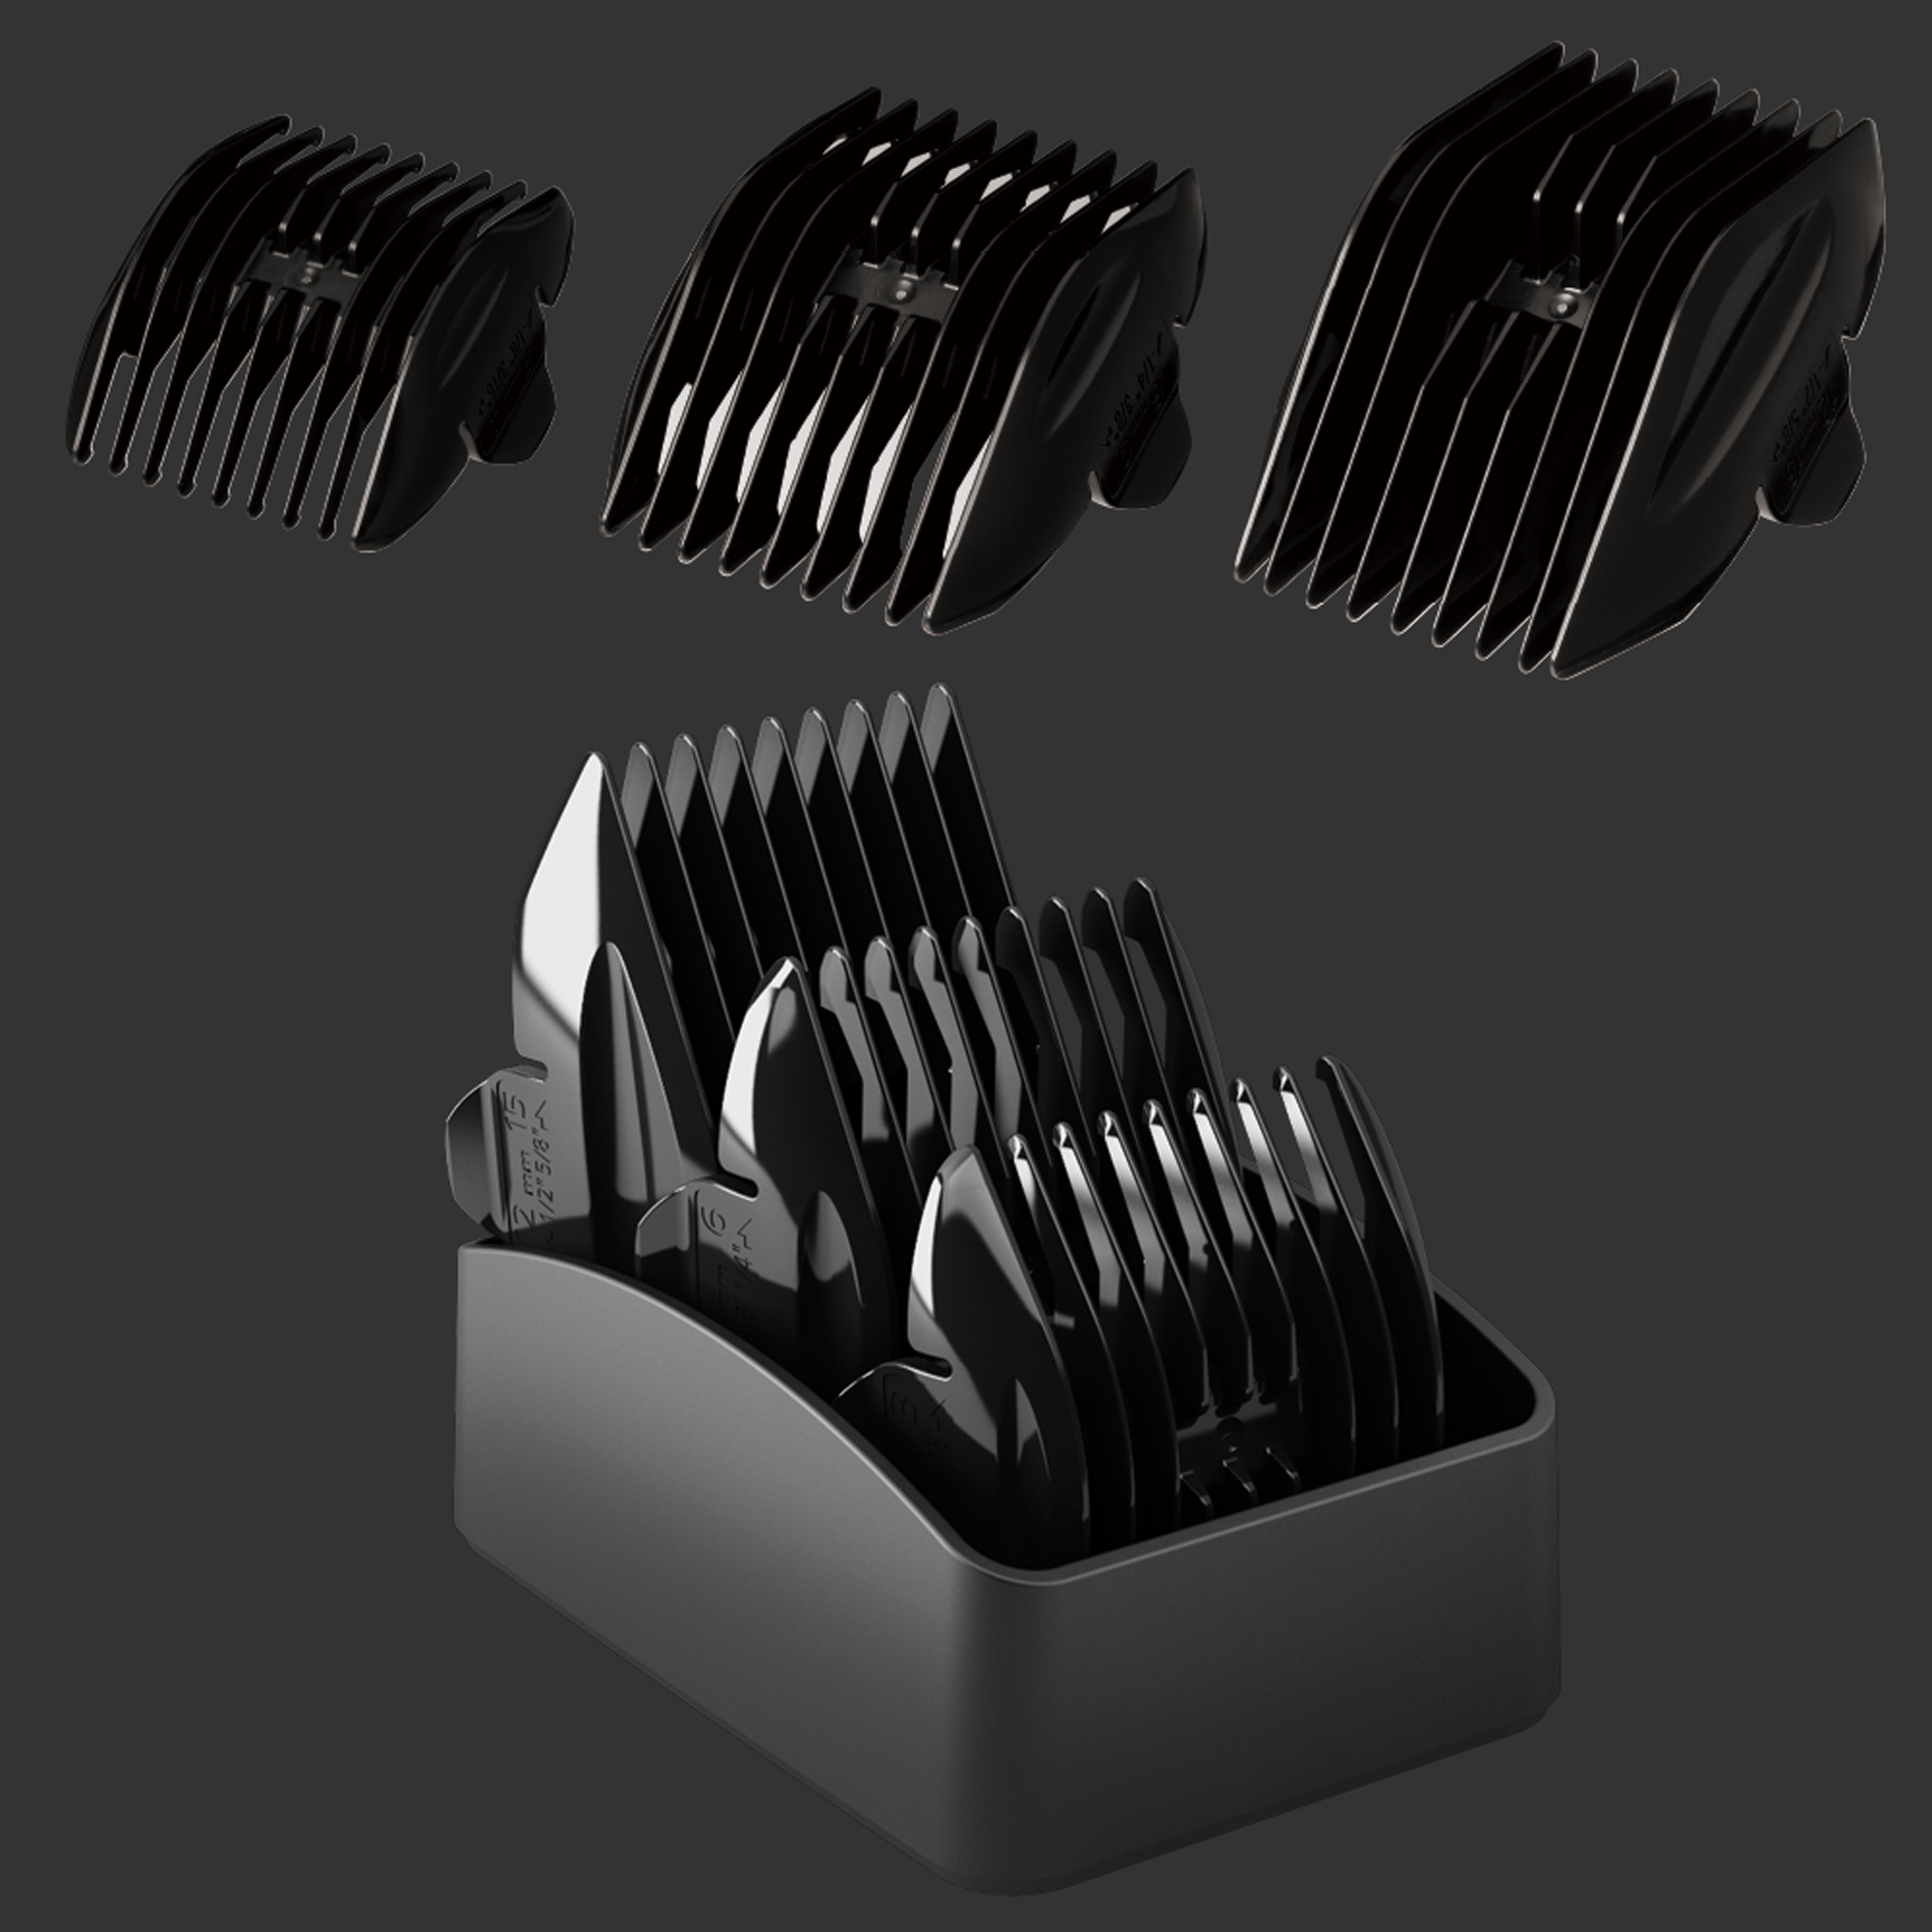 Six cutting lengths with three comb attachments